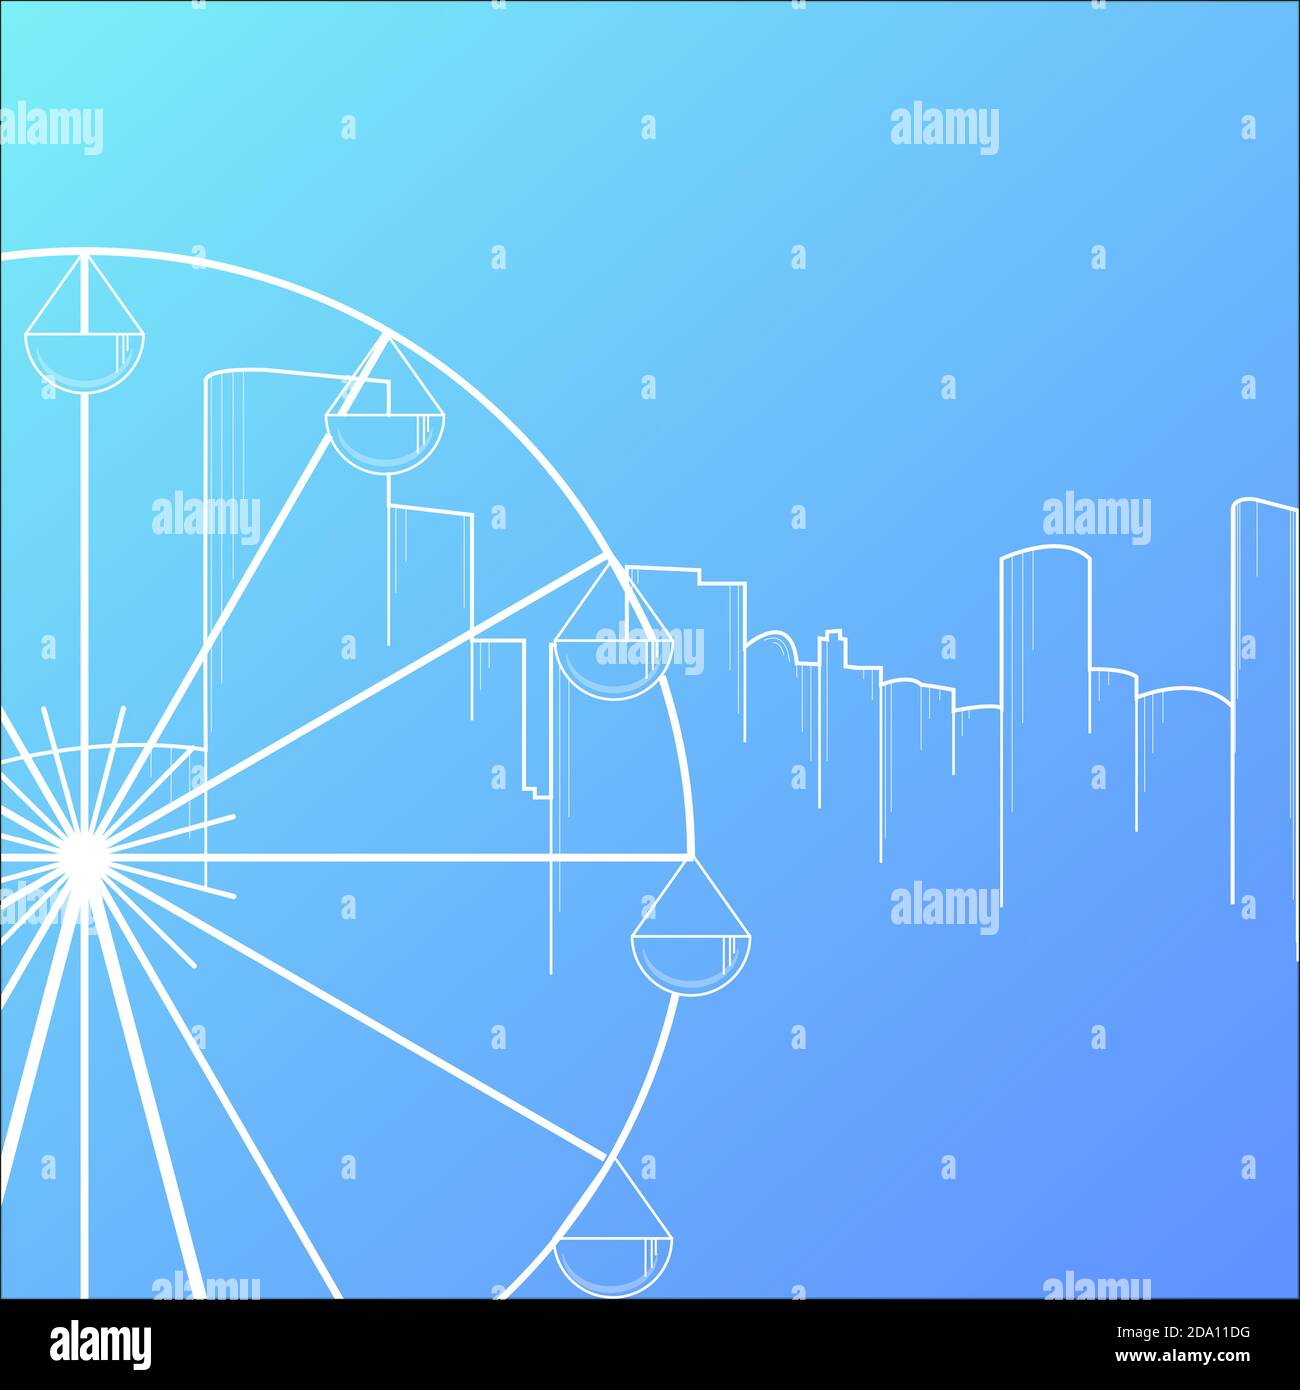 Modern city skyline background flat style vector illustration. Buildings cityscape with ferris wheel. Stock Vector